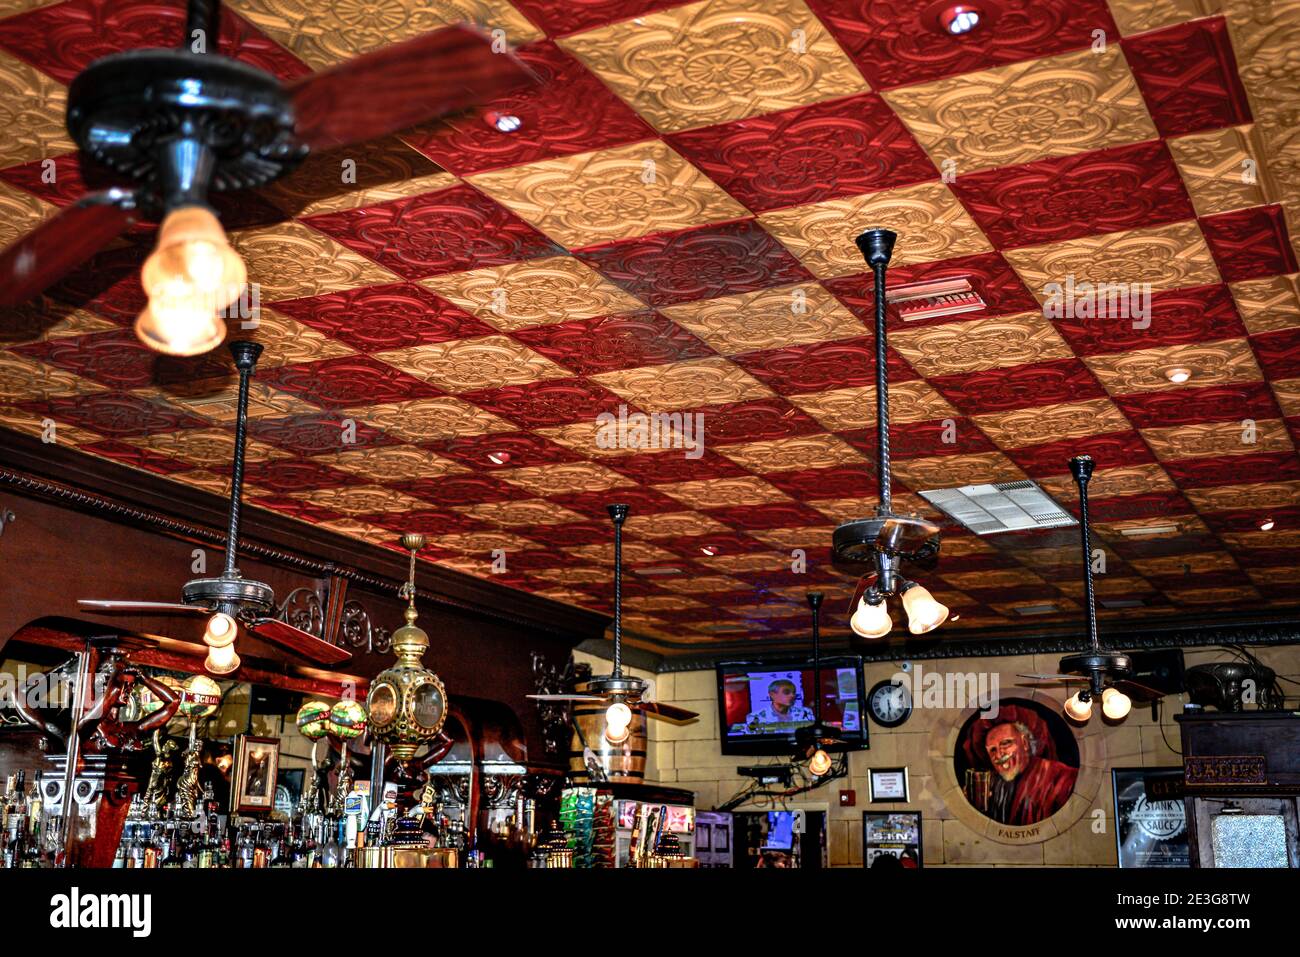 A red and yellow decorative pressed tin ceiling in the oldest bar in Florida, The Palace Saloon in Fernandian Beach on Amelia Island, FL Stock Photo